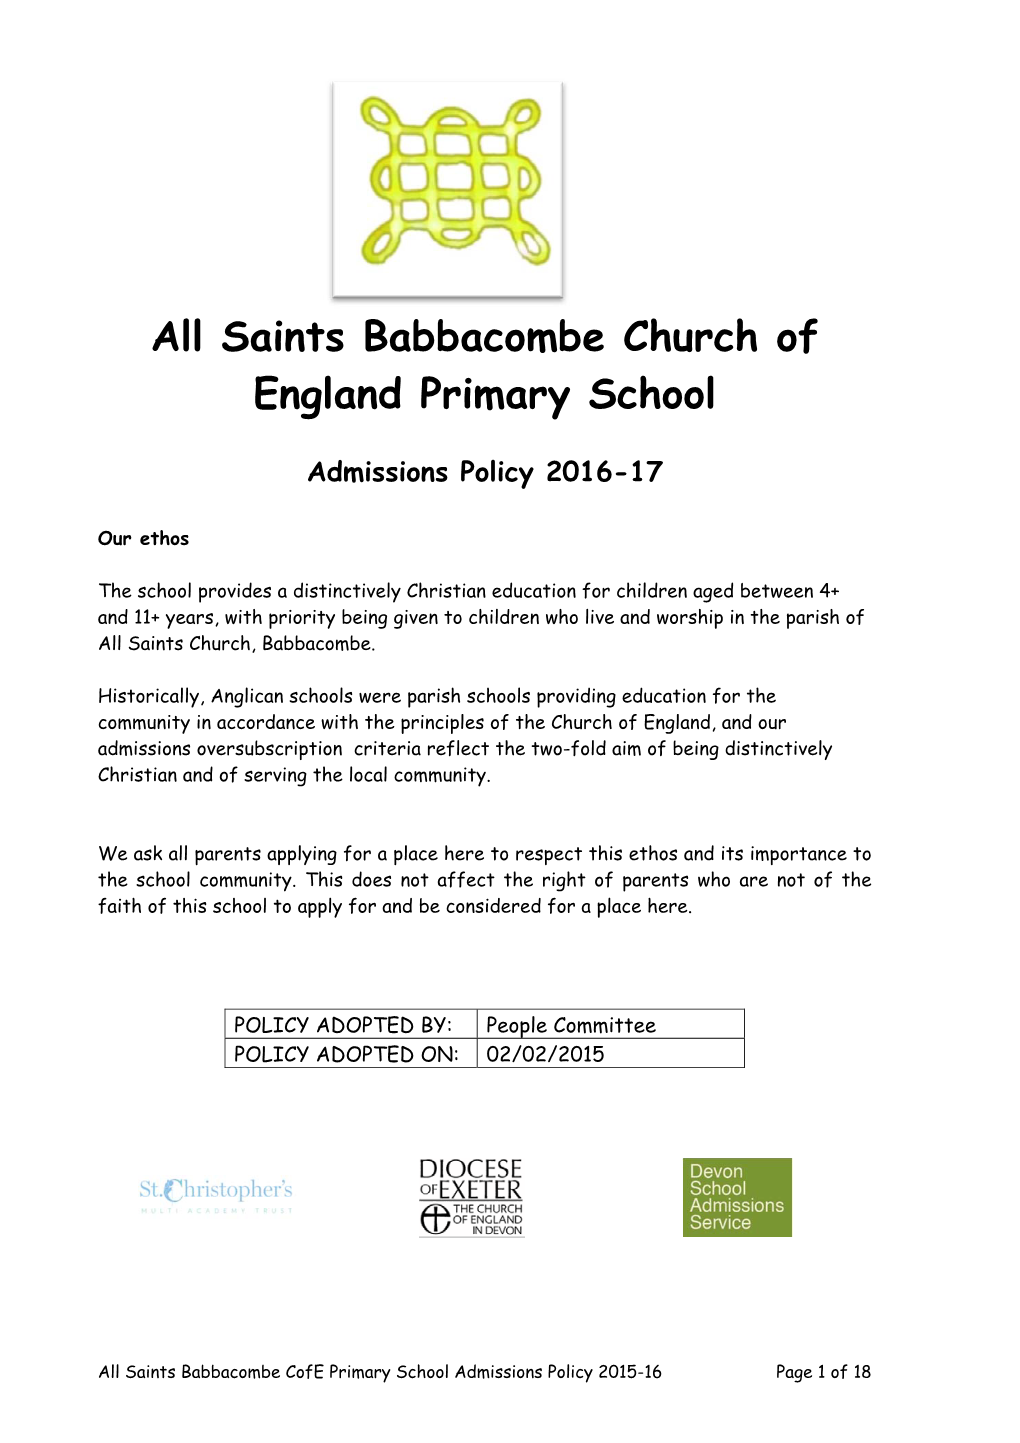 All Saints Babbacombe Church of England Primary School